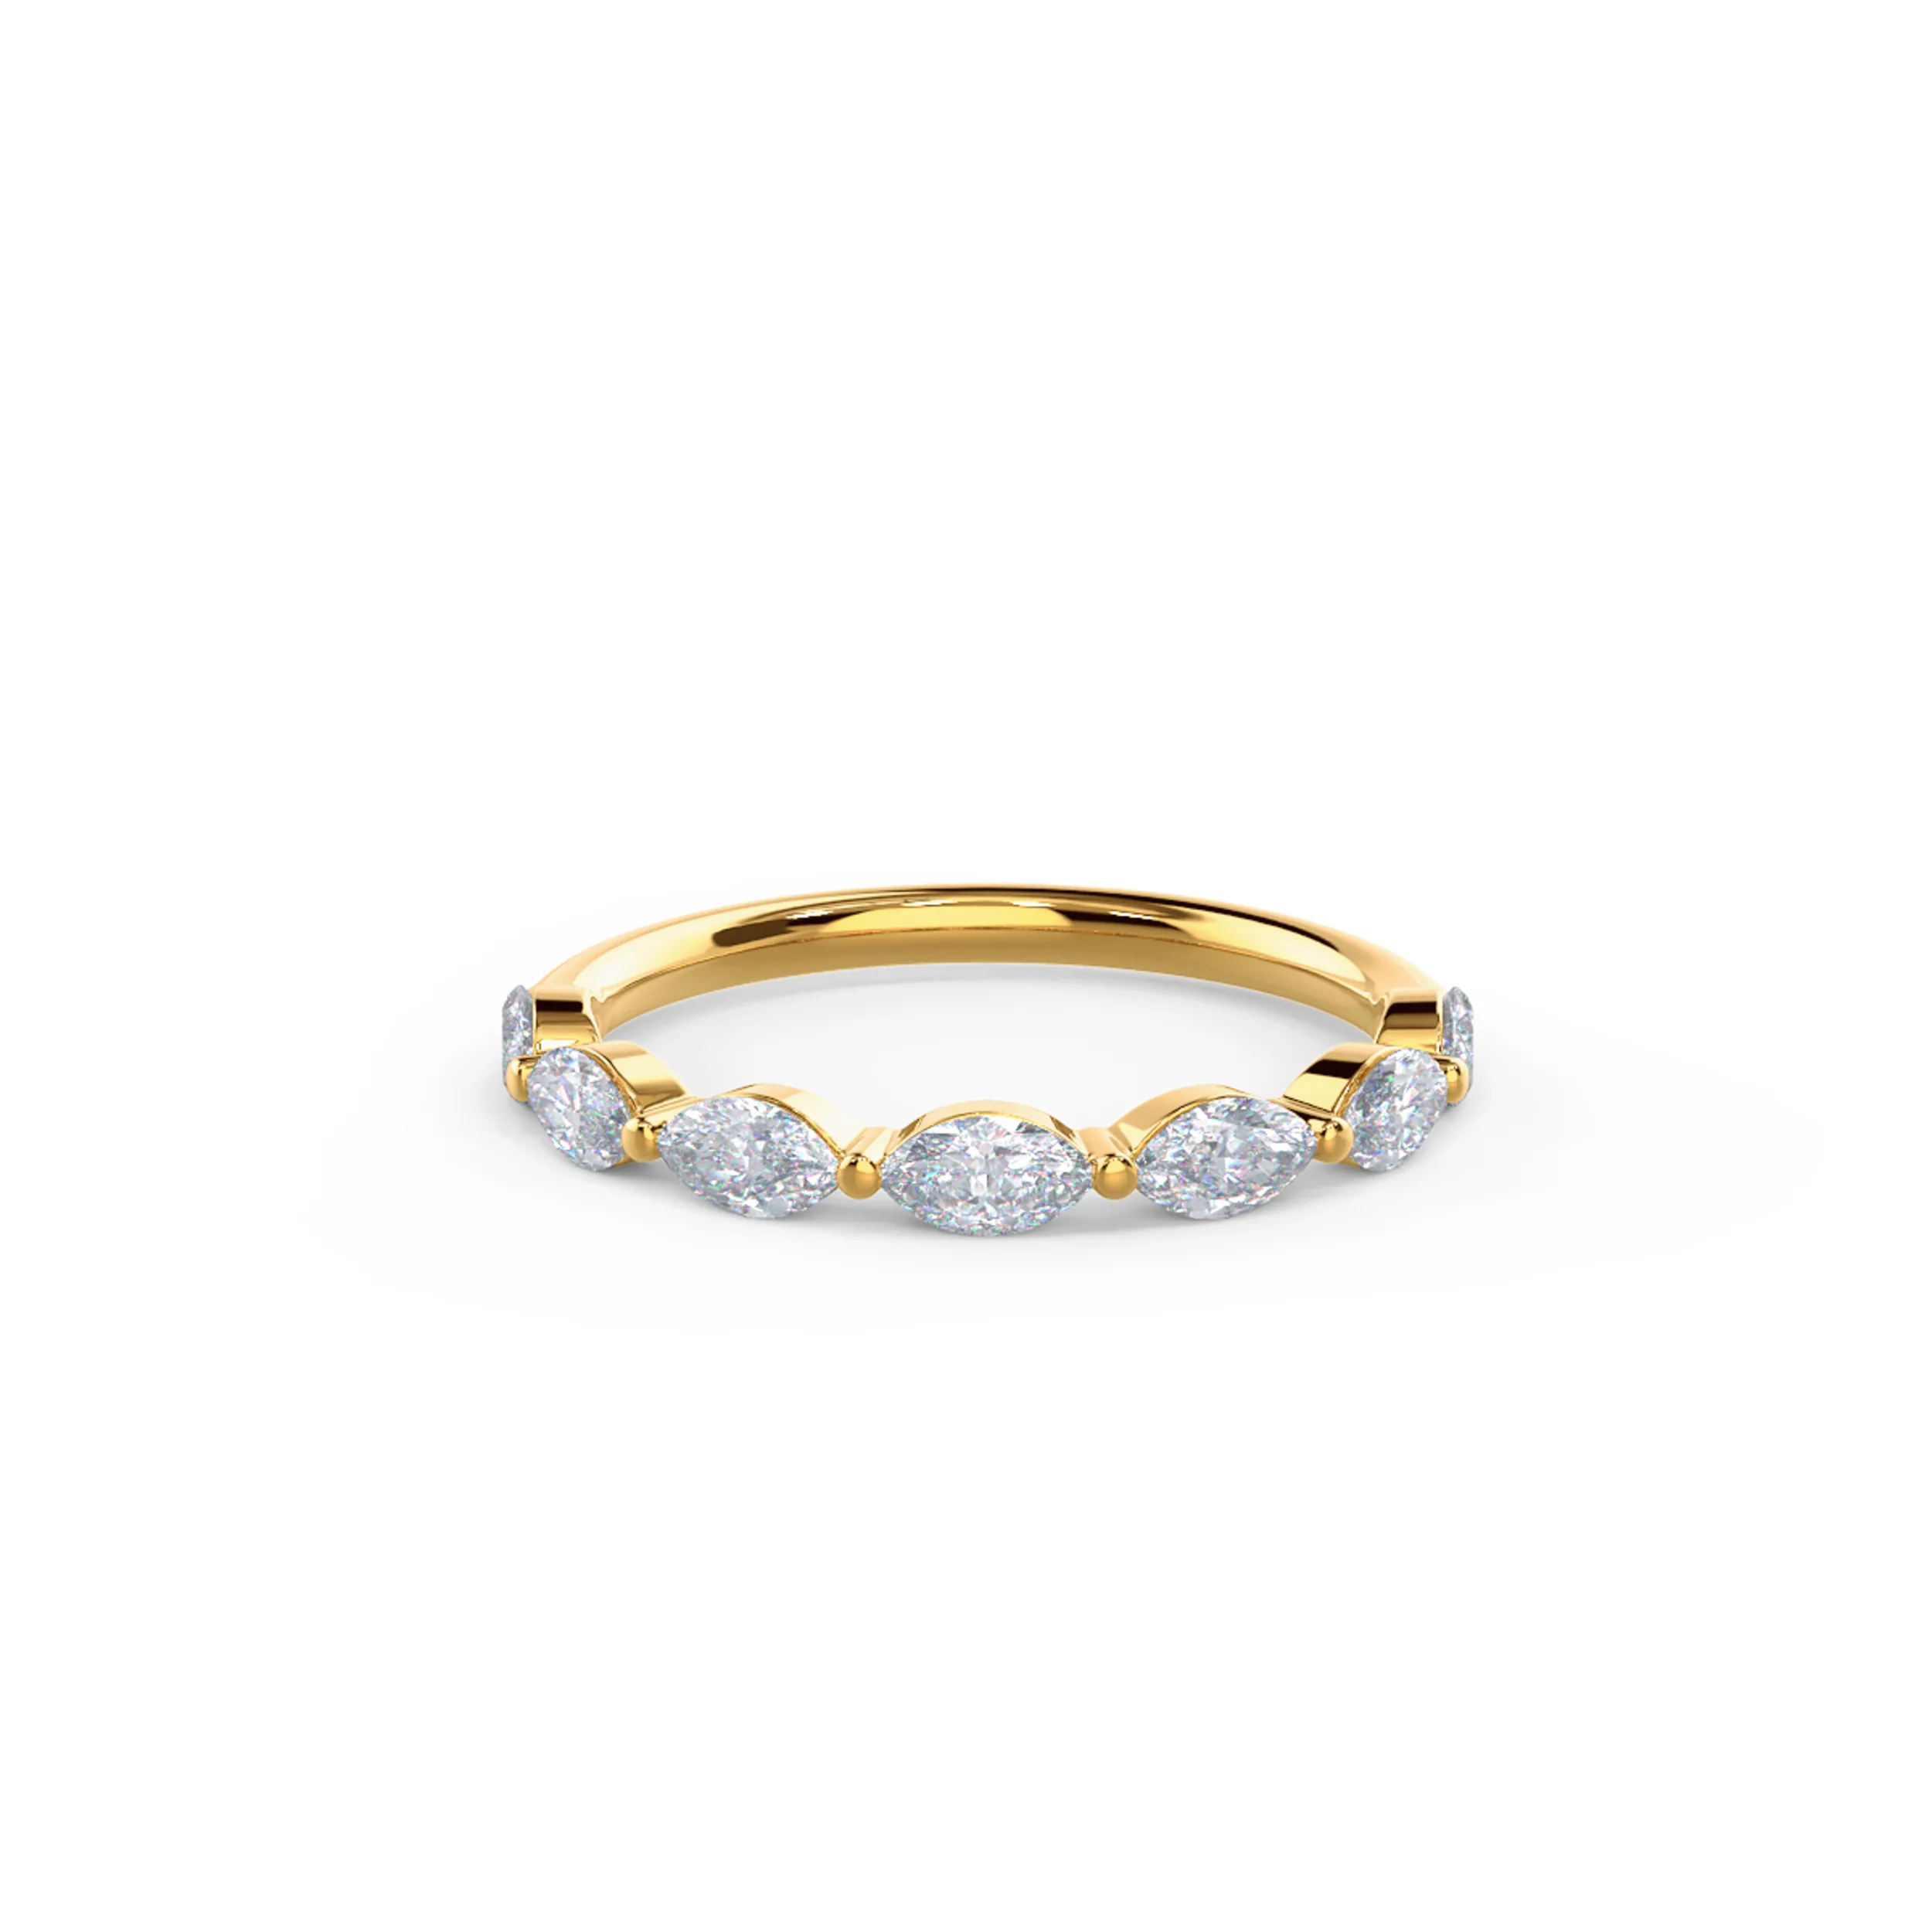 0.7 Carat Diamonds set in 18k Yellow Gold Marquise East-West Half Band (Main View)